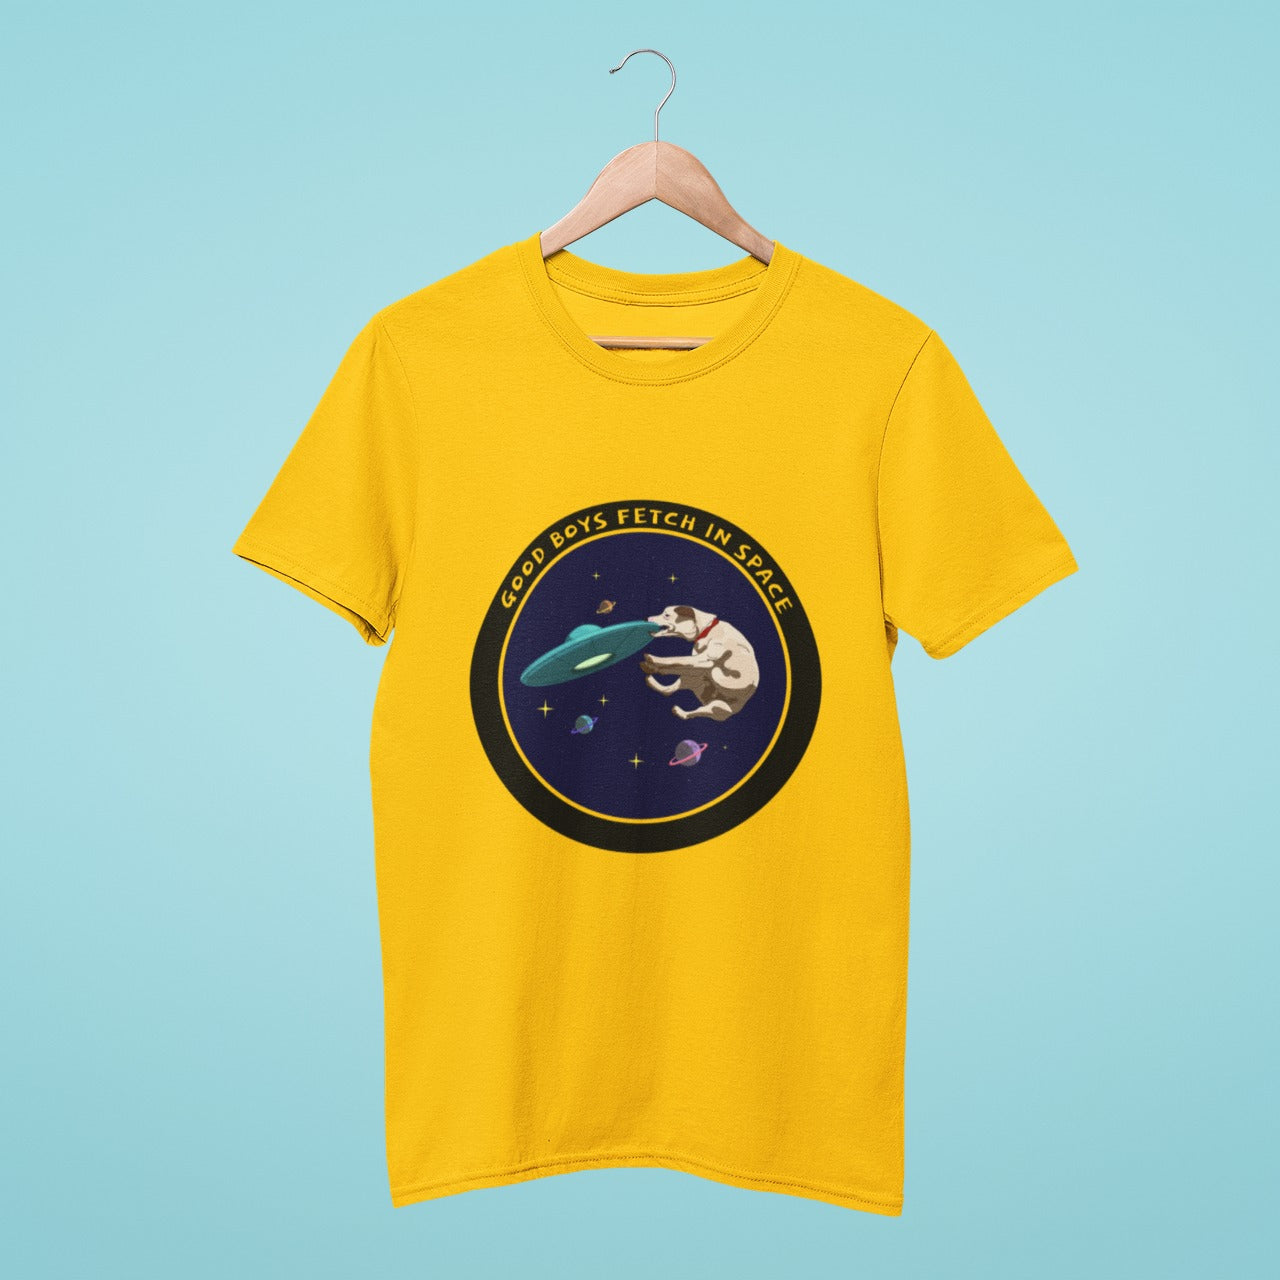 Add some playful charm to your wardrobe with our yellow t-shirt featuring a delightful design of a dog playing with a UFO in space, with the slogan "Good Boys Fetch in Space". Perfect for dog lovers who also love fun, lighthearted fashion. Made from high-quality materials, this comfortable and durable t-shirt is a must-have. Order now and show off your love for furry friends and the cosmos!